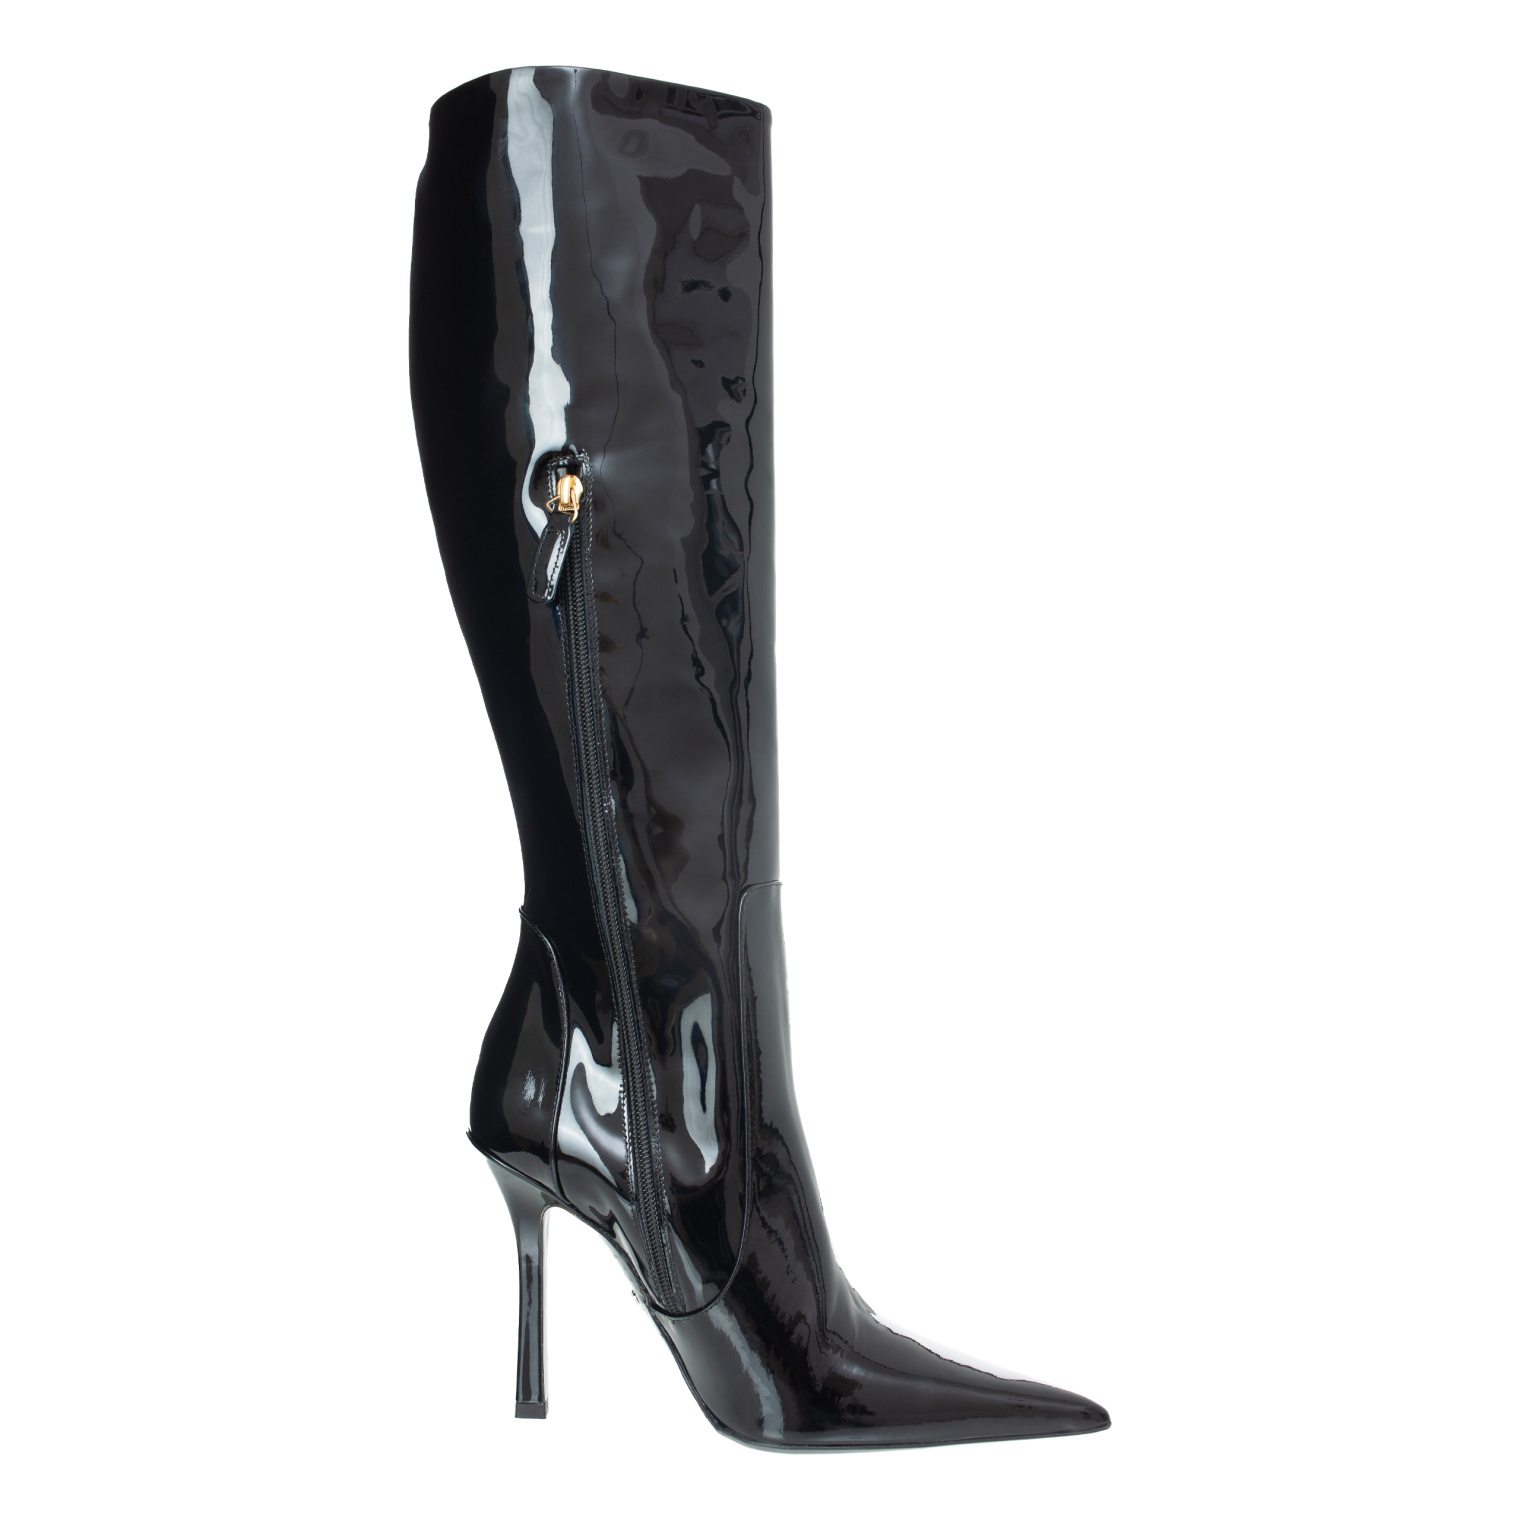 Blumarine Latent leather knee-high boots